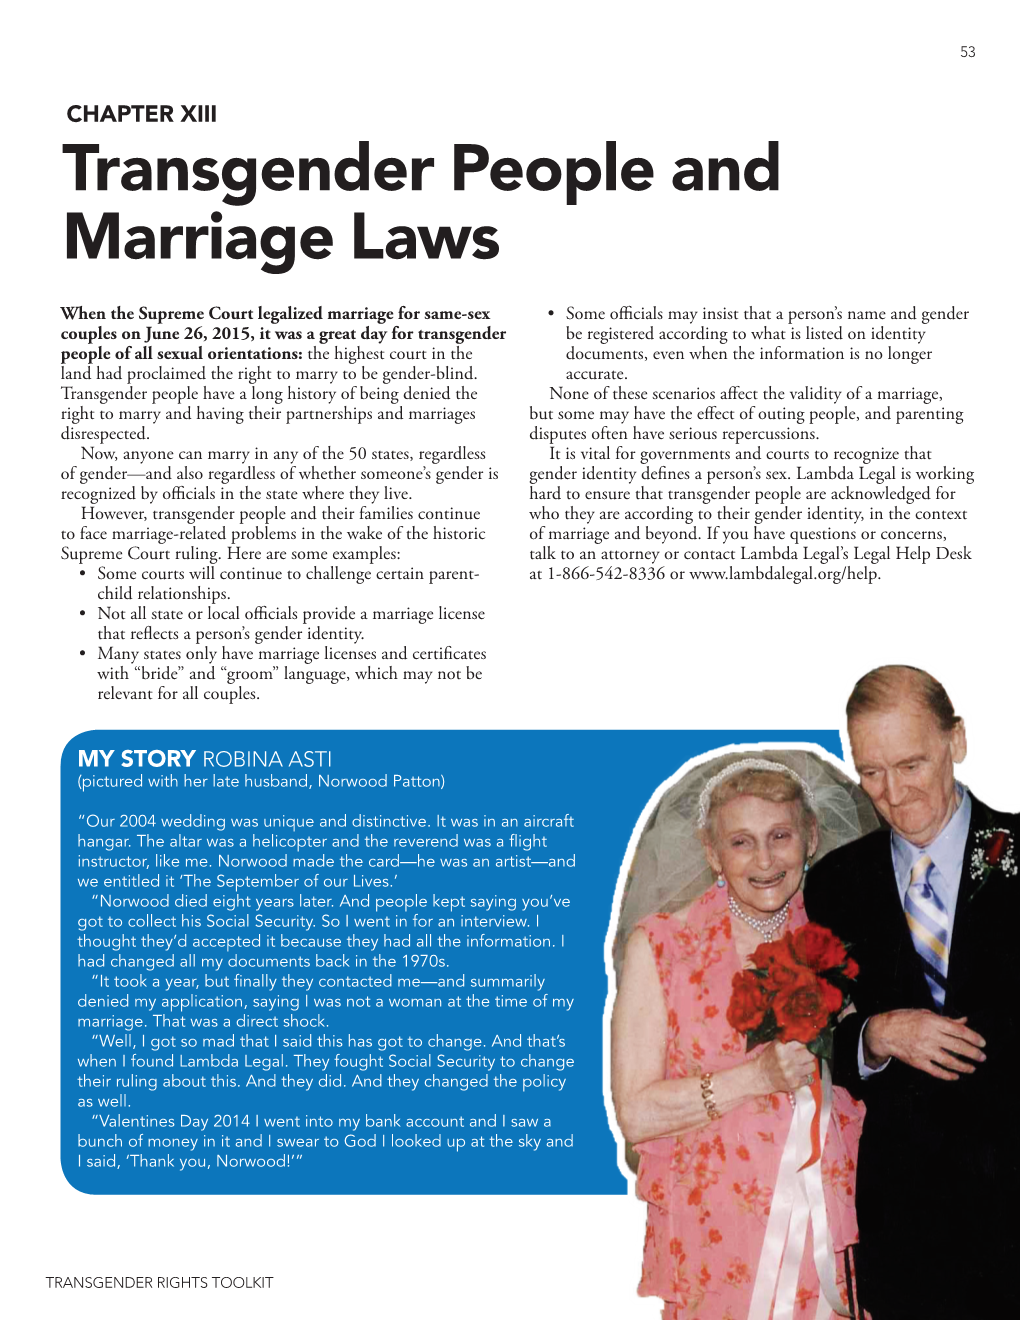 Transgender People and Marriage Laws